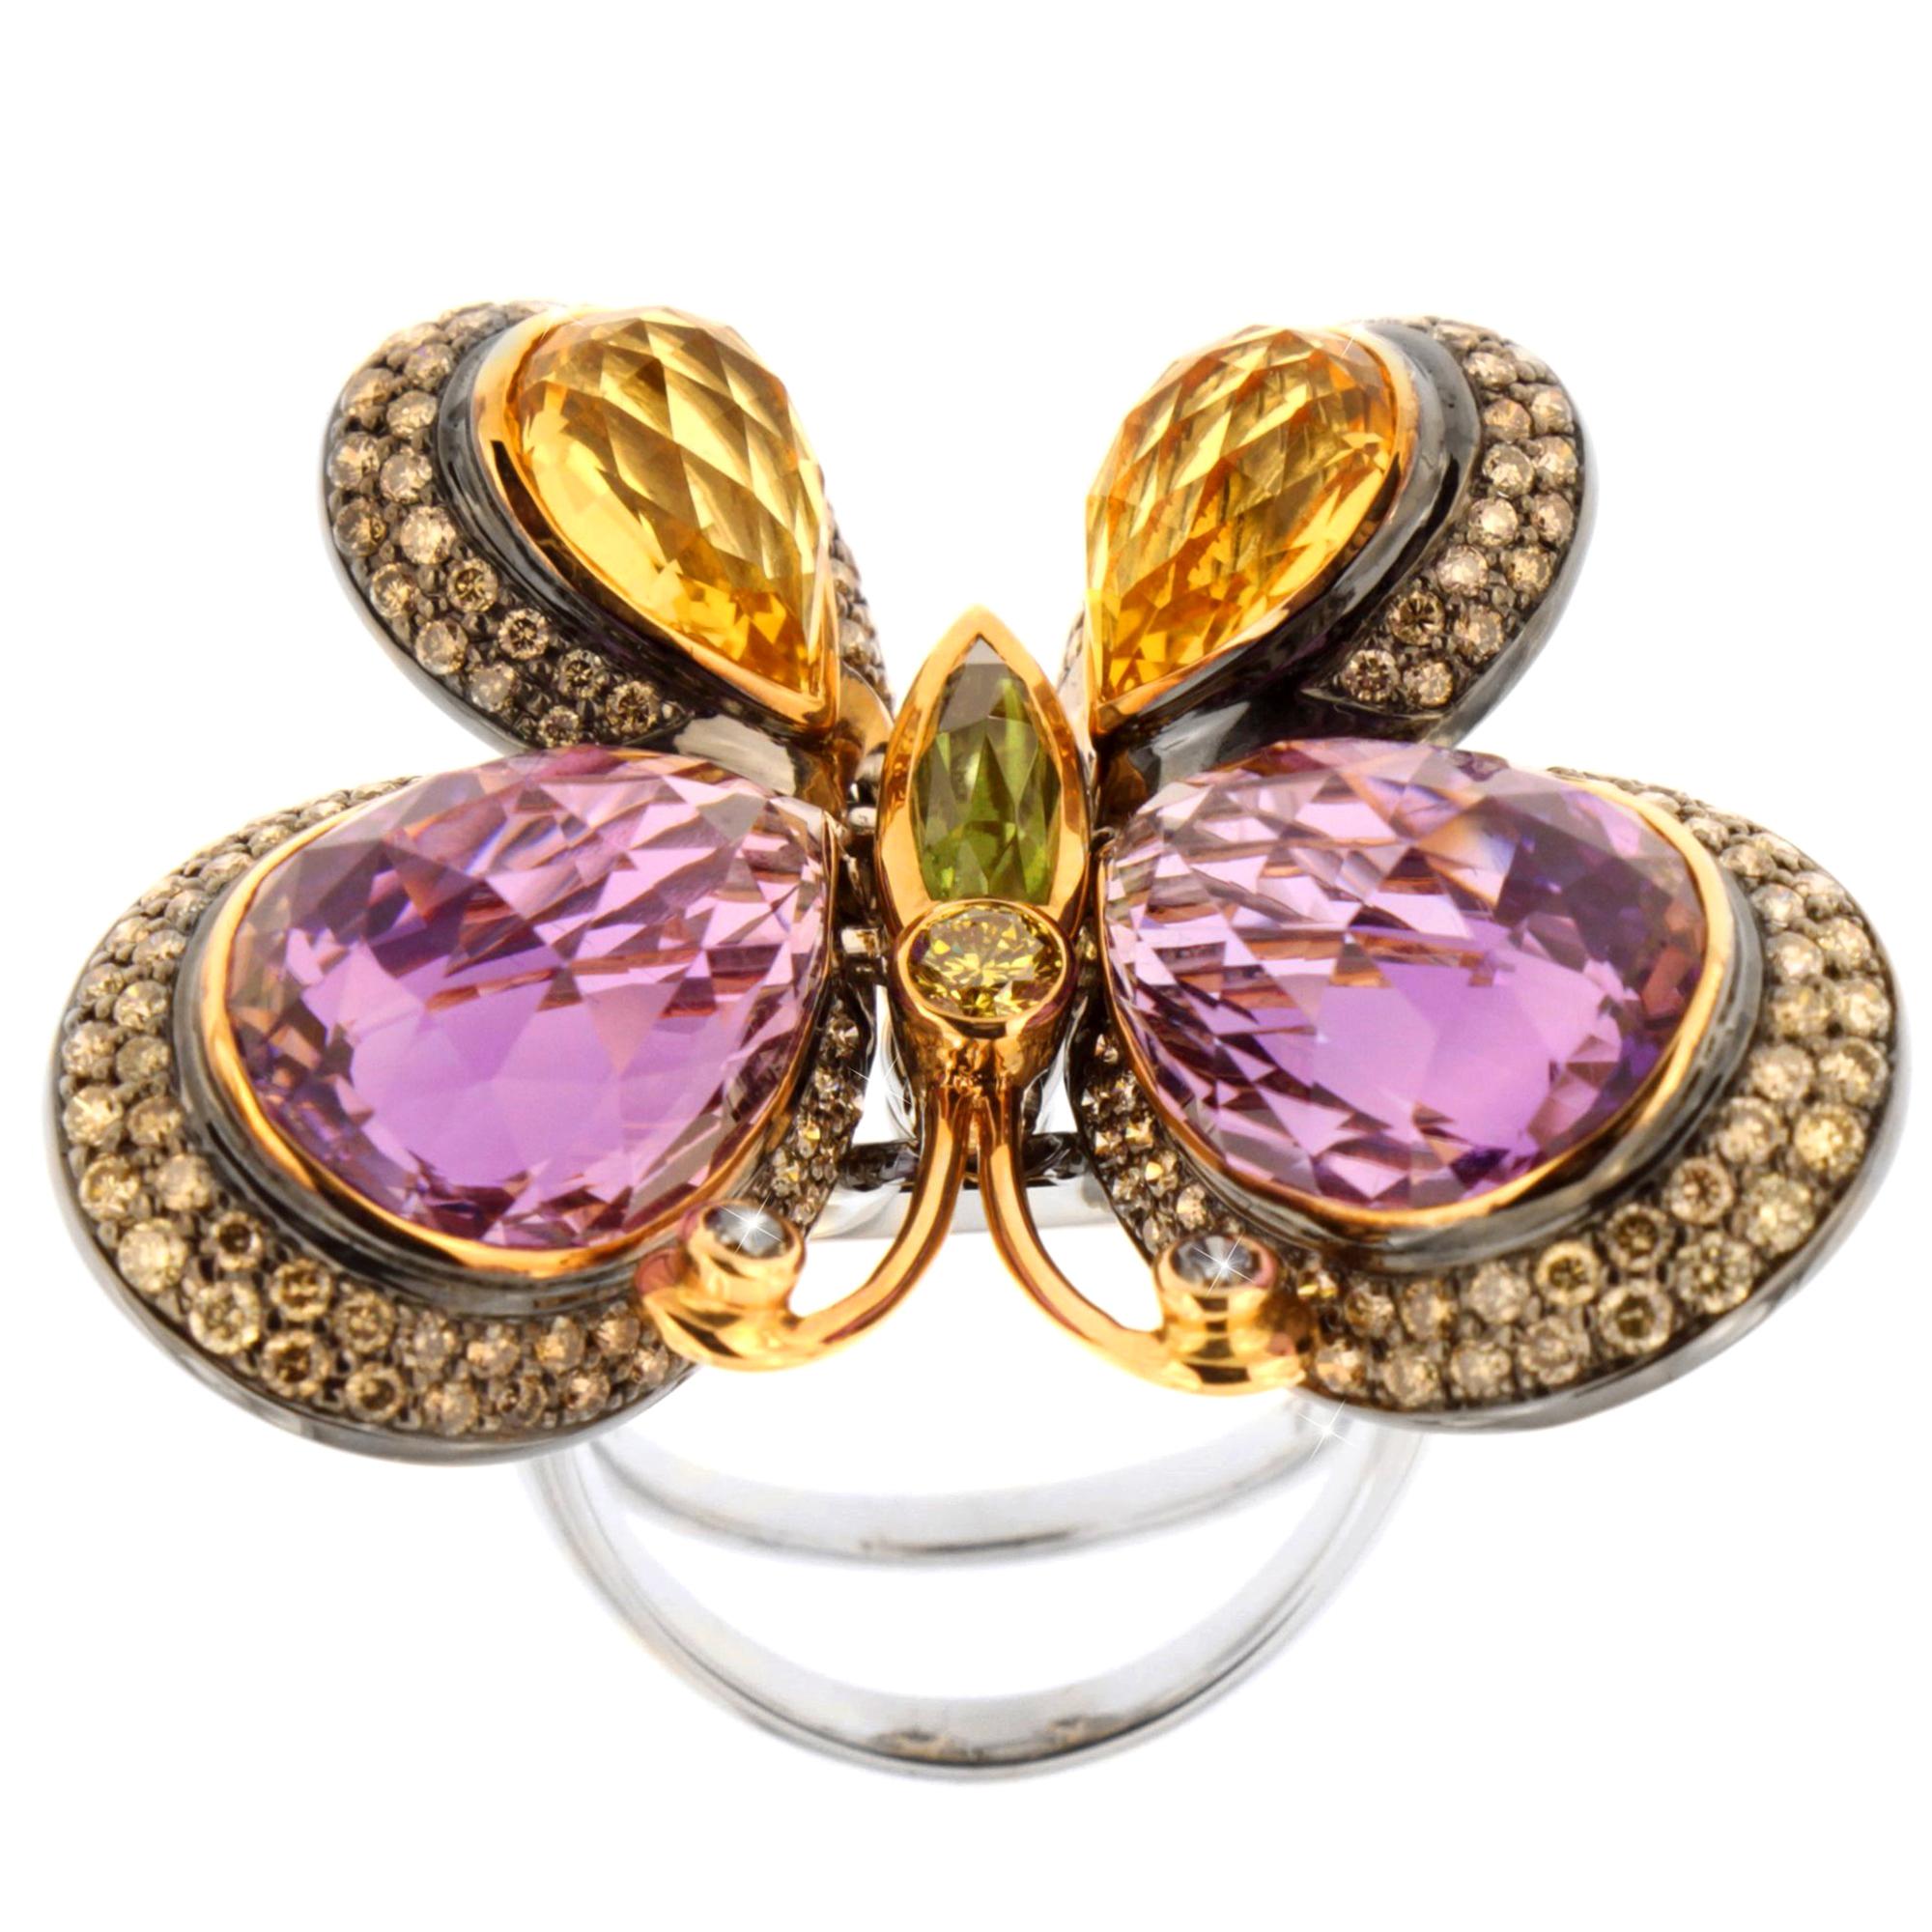 Zorab Creation, the Madam Butterfly Fluttering Ring in Amethyst and Diamonds For Sale